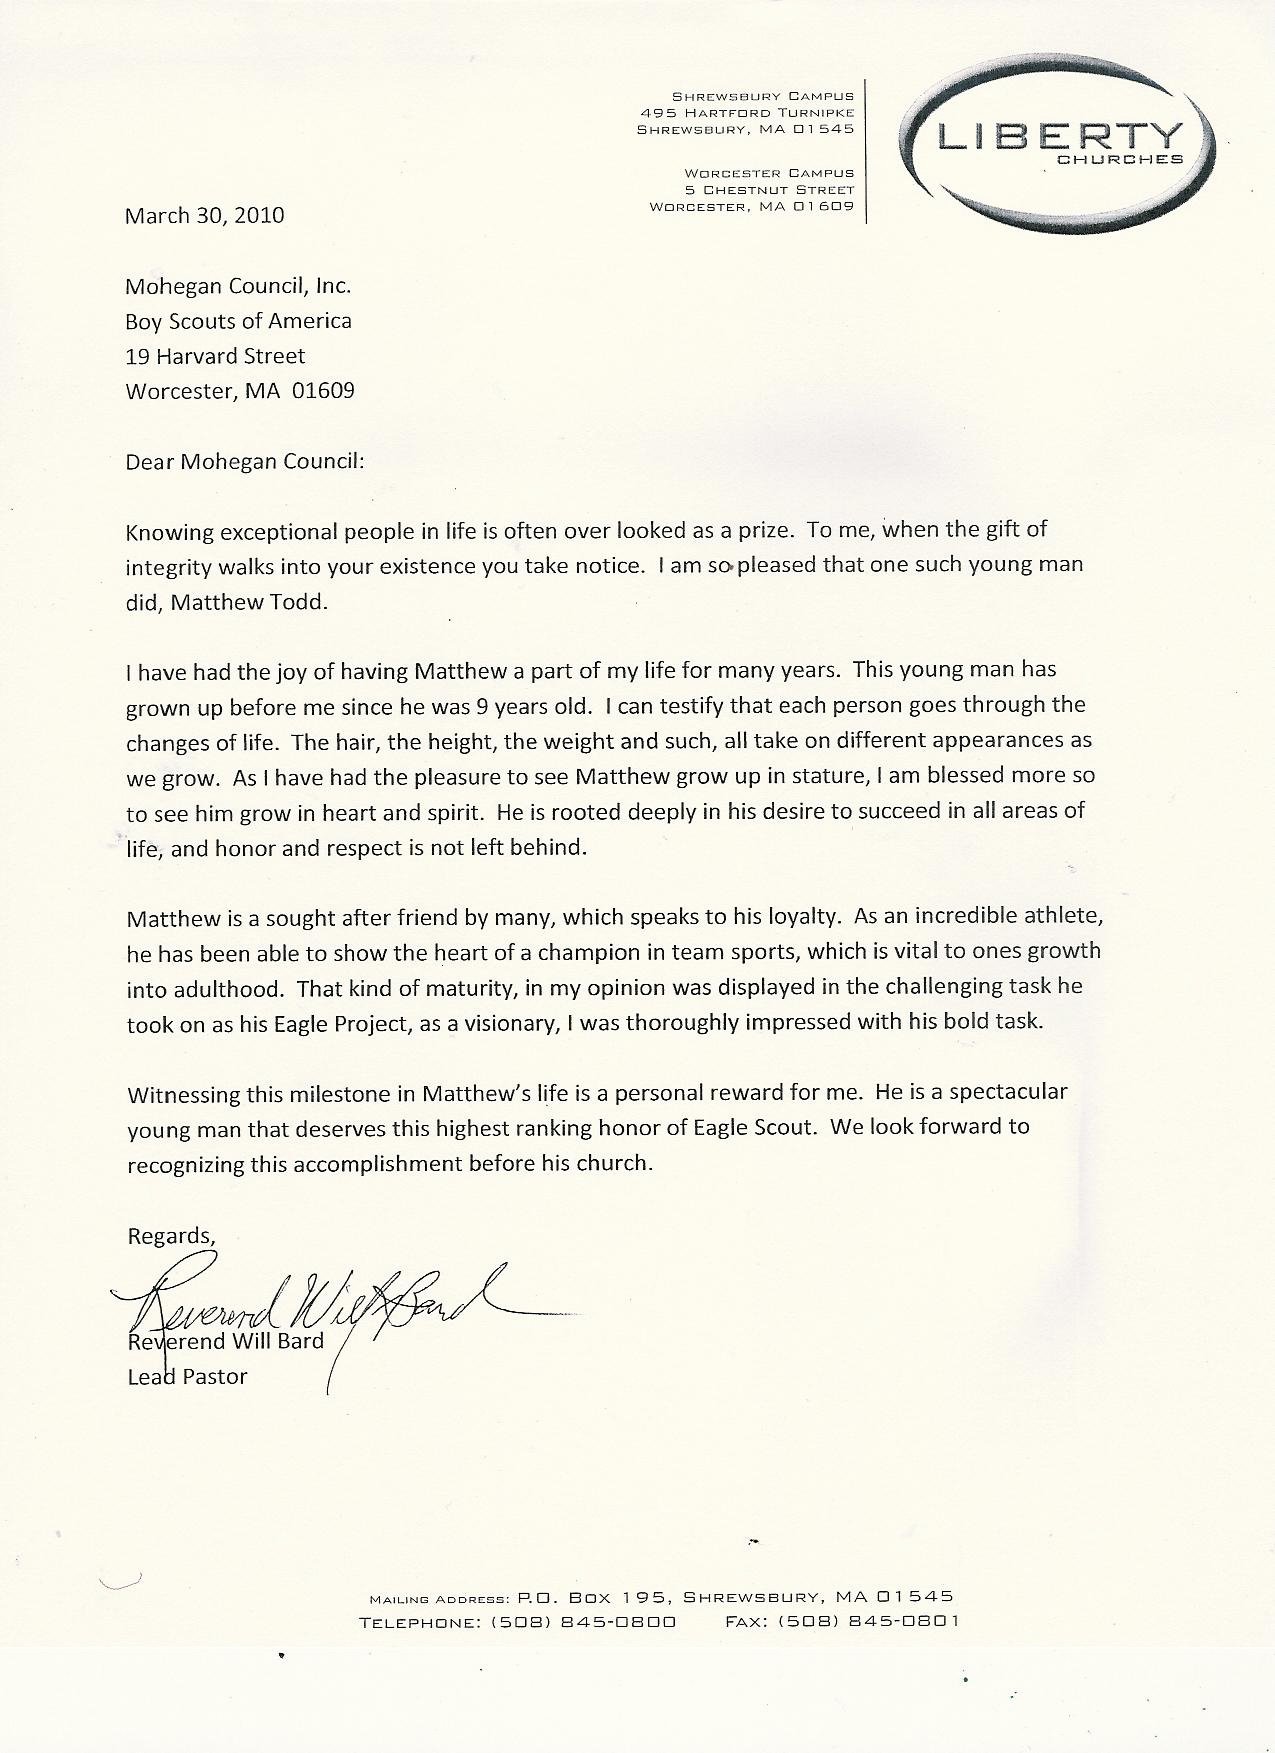 Boy Scout Letter Of Recommendation New Eagle Scout Re Mendation Letter Template Examples